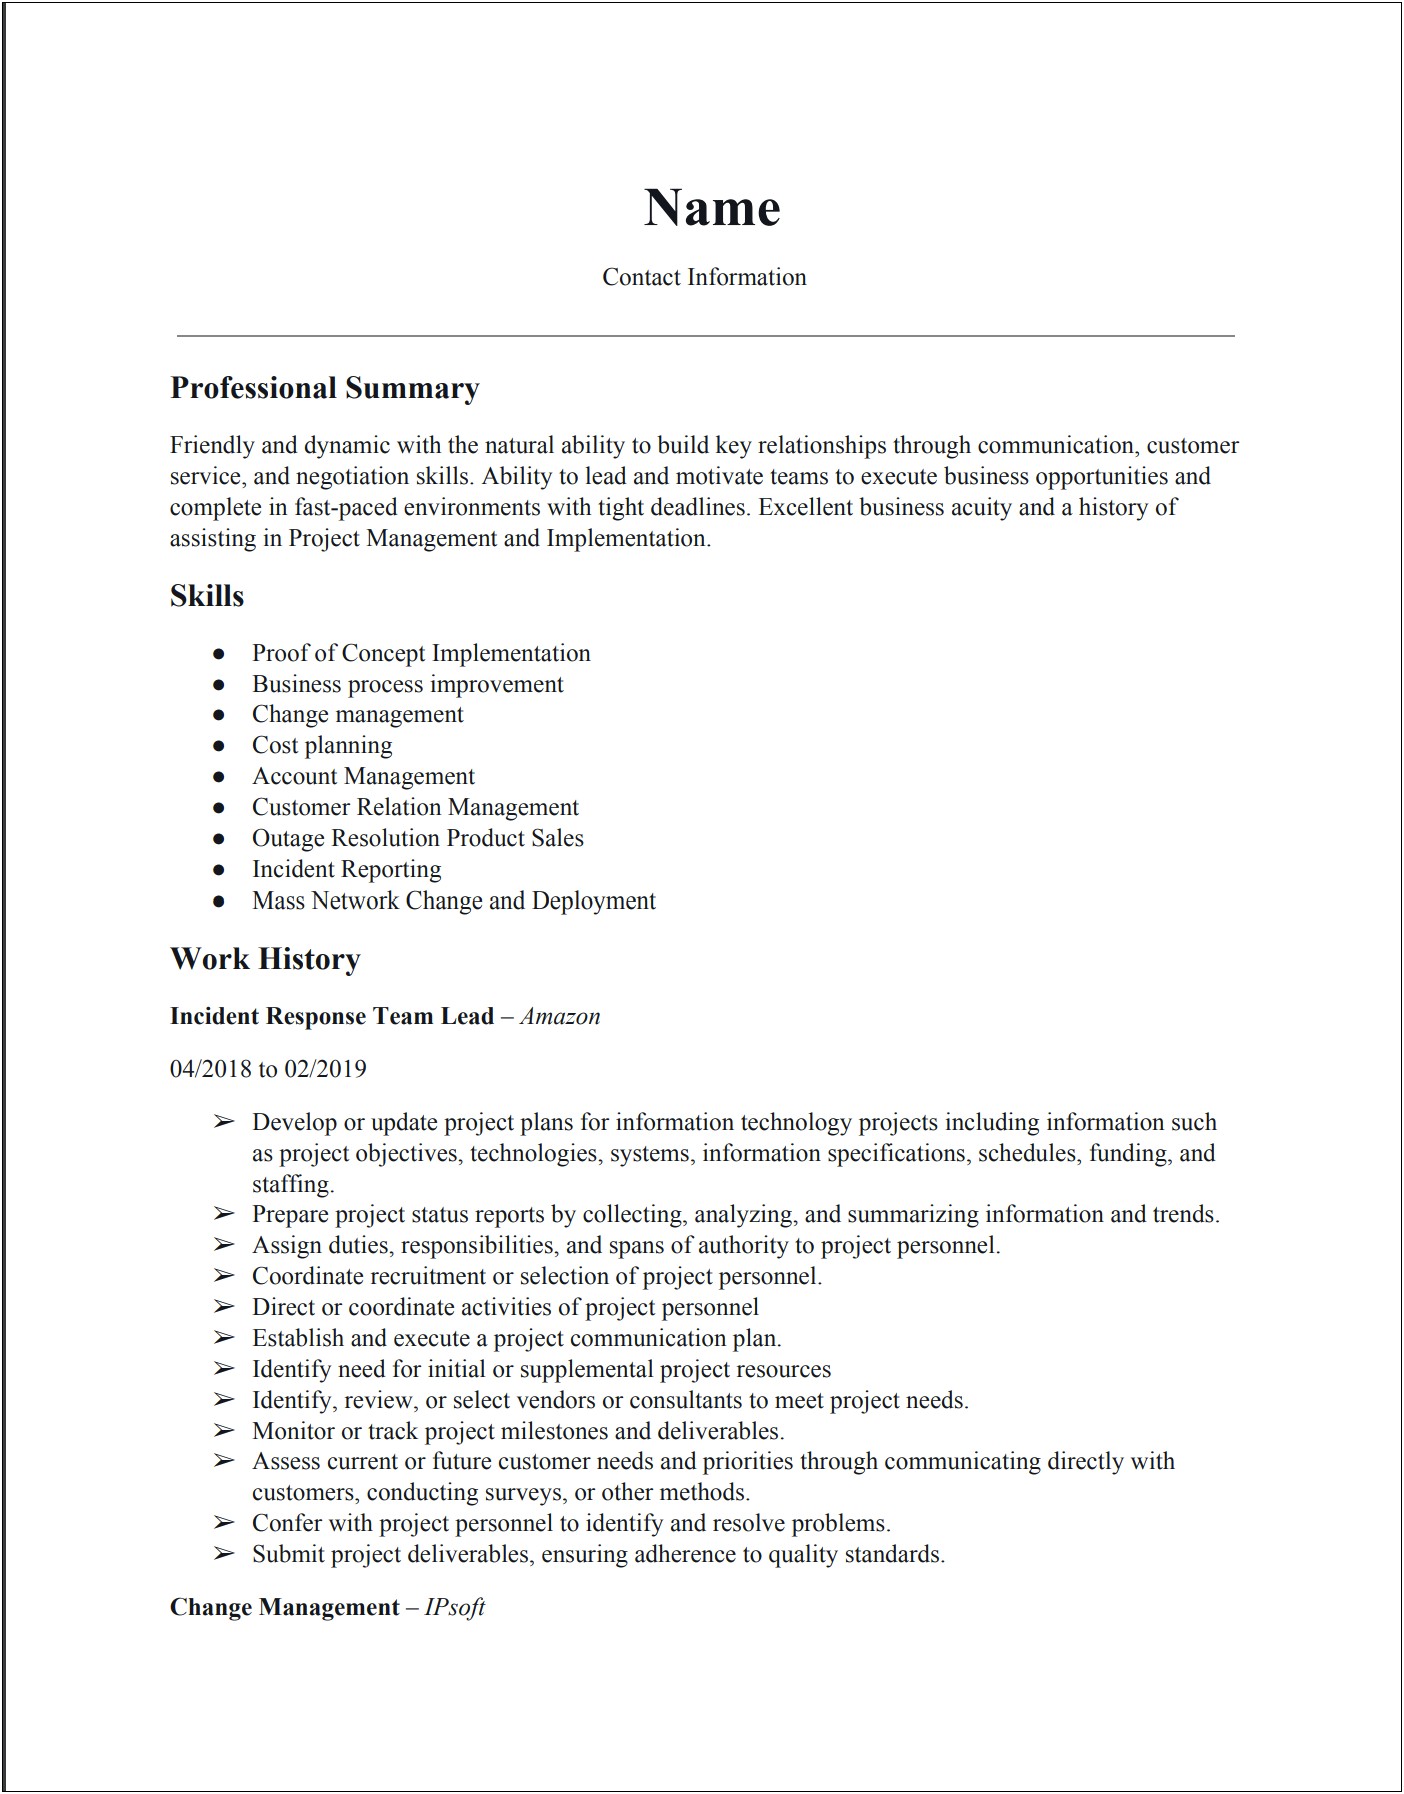 Incident And Change Management Resume